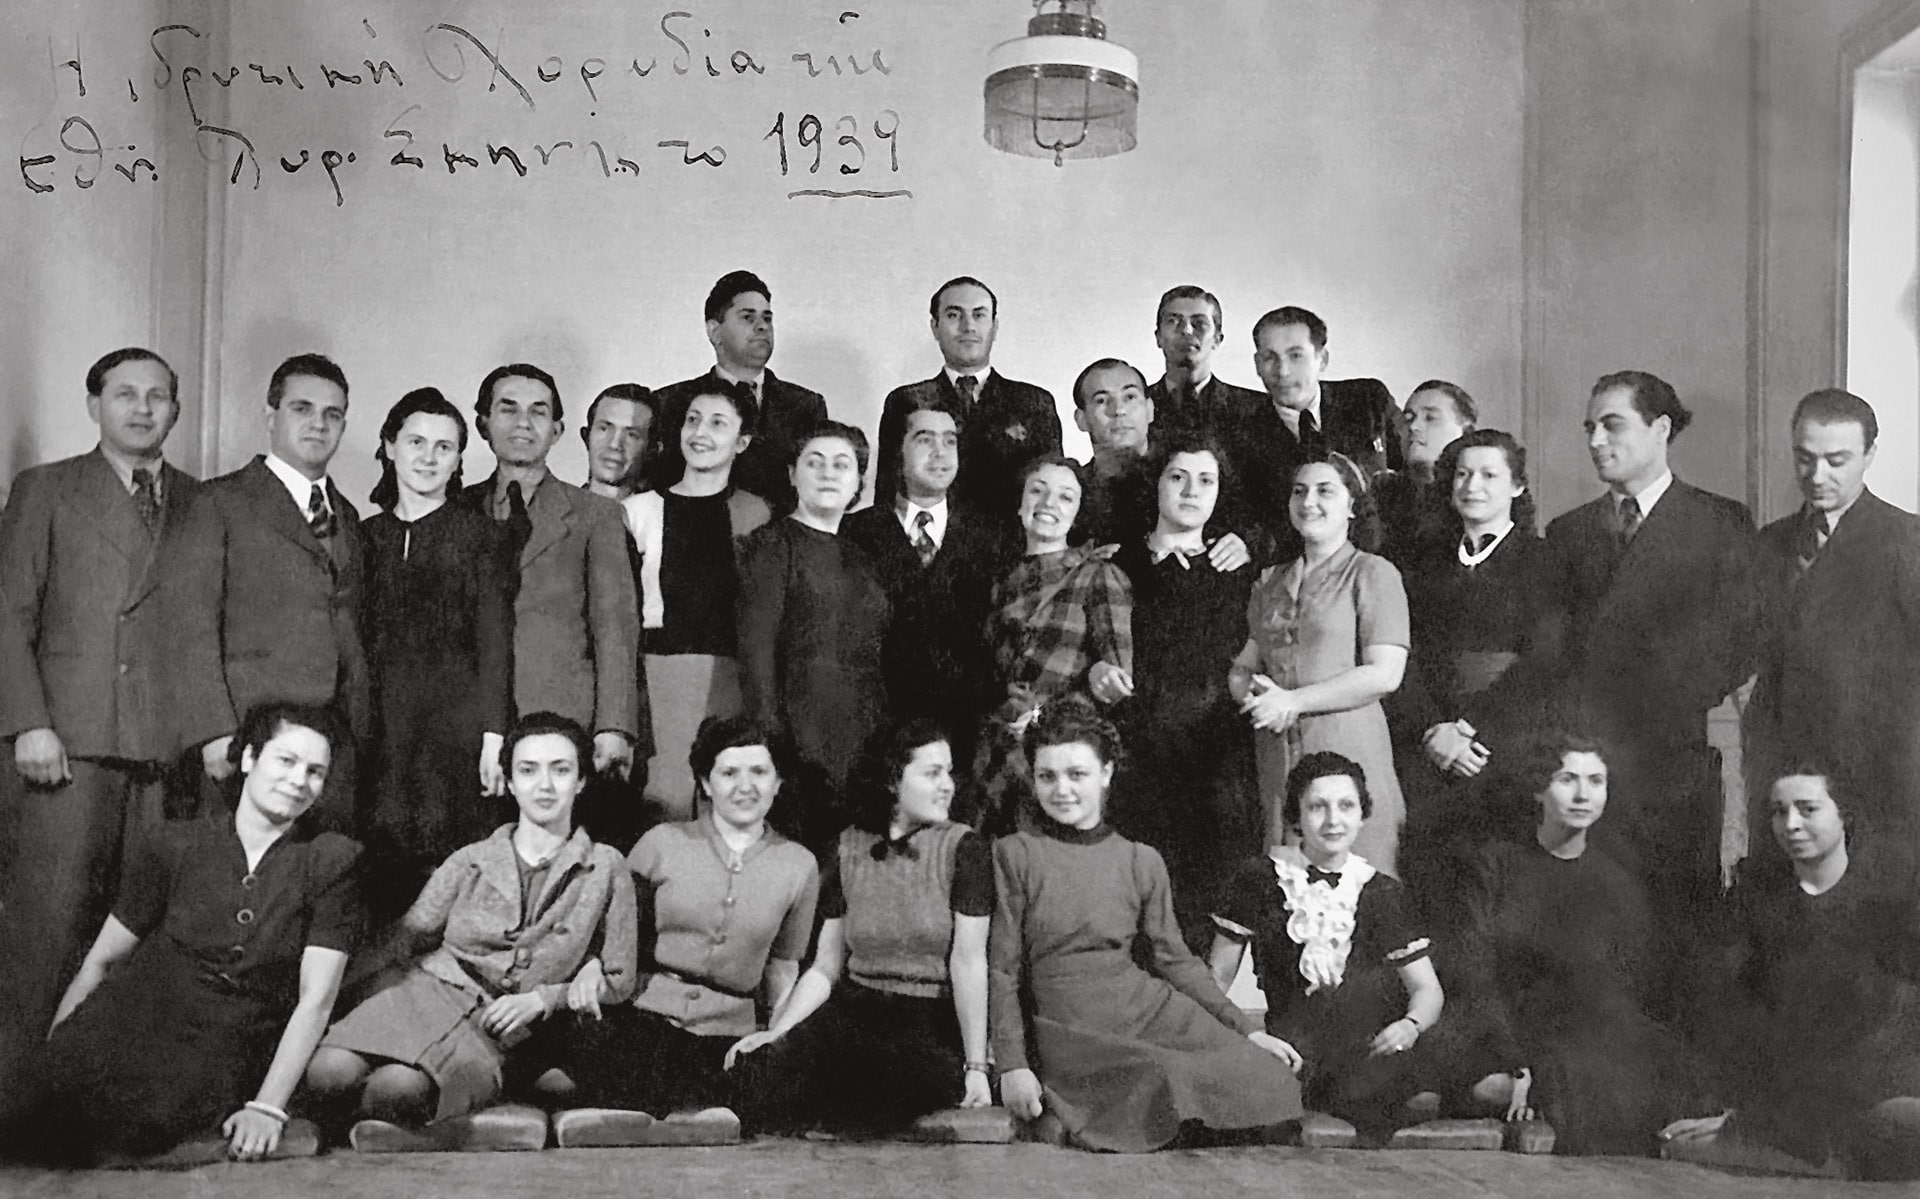 The choir of the National Opera of the Royal Theatre, Athens 1939